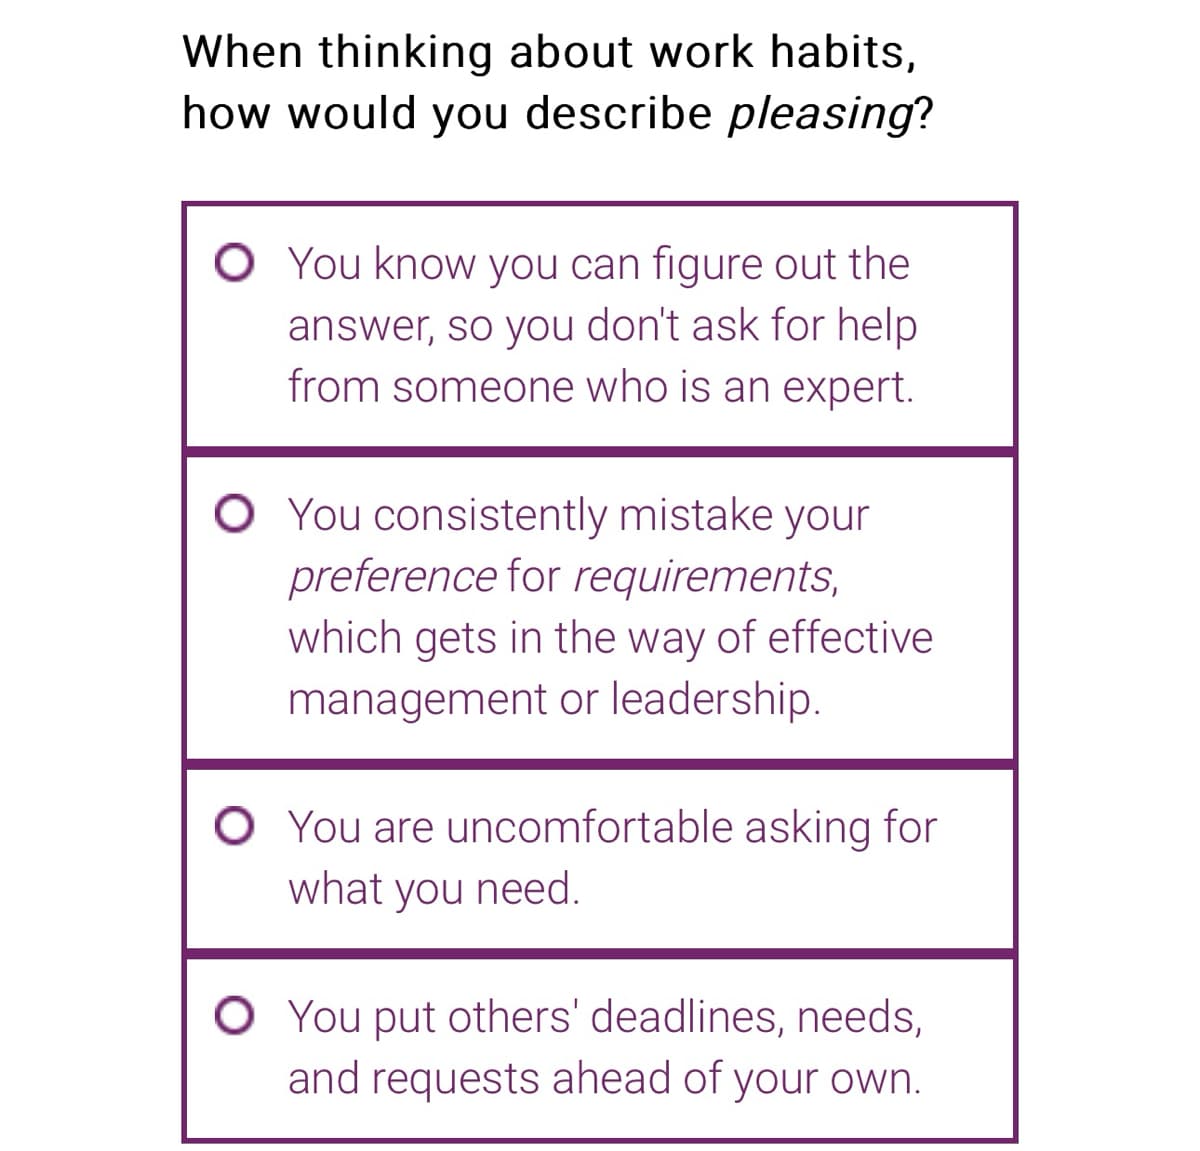 When thinking about work habits,
how would you describe pleasing?
O You know you can figure out the
answer, so you don't ask for help
from someone who is an expert.
You consistently mistake your
preference for requirements,
which gets in the way of effective
management or leadership.
O You are uncomfortable asking for
what you need.
O You put others' deadlines, needs,
and requests ahead of your own.